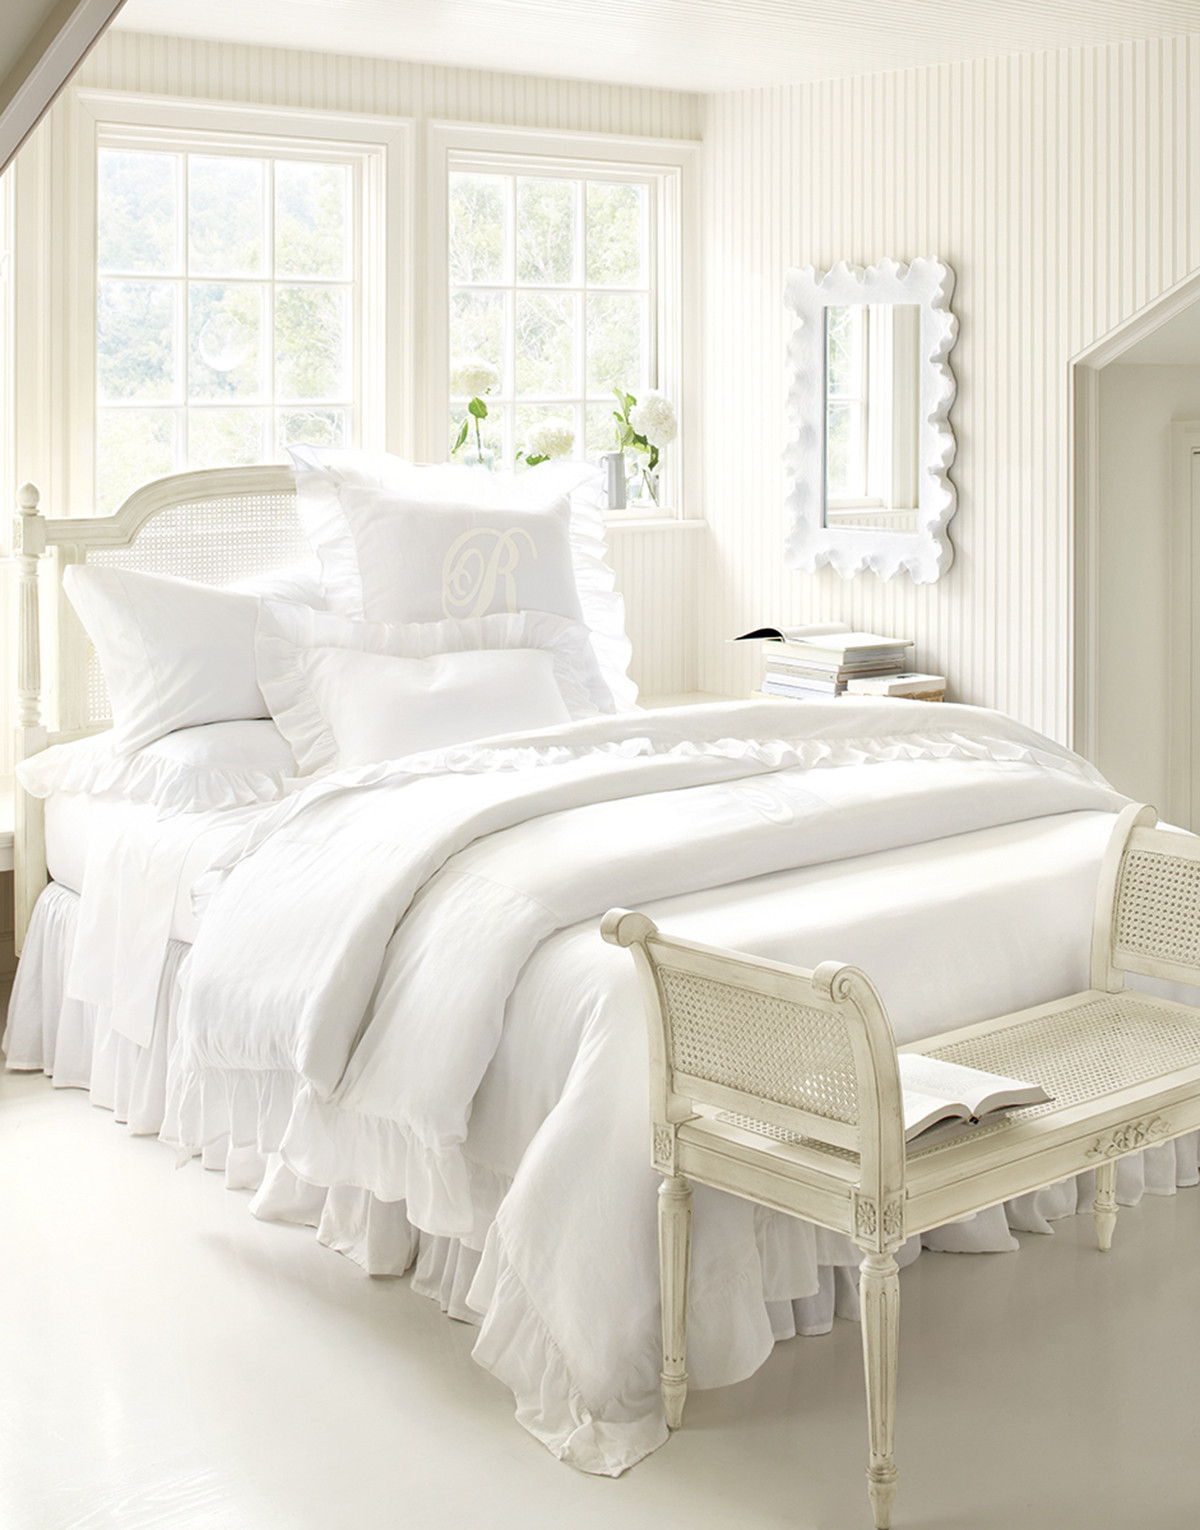 Small White Bedroom Ideas
 50 Best Bedrooms With White Furniture for 2019